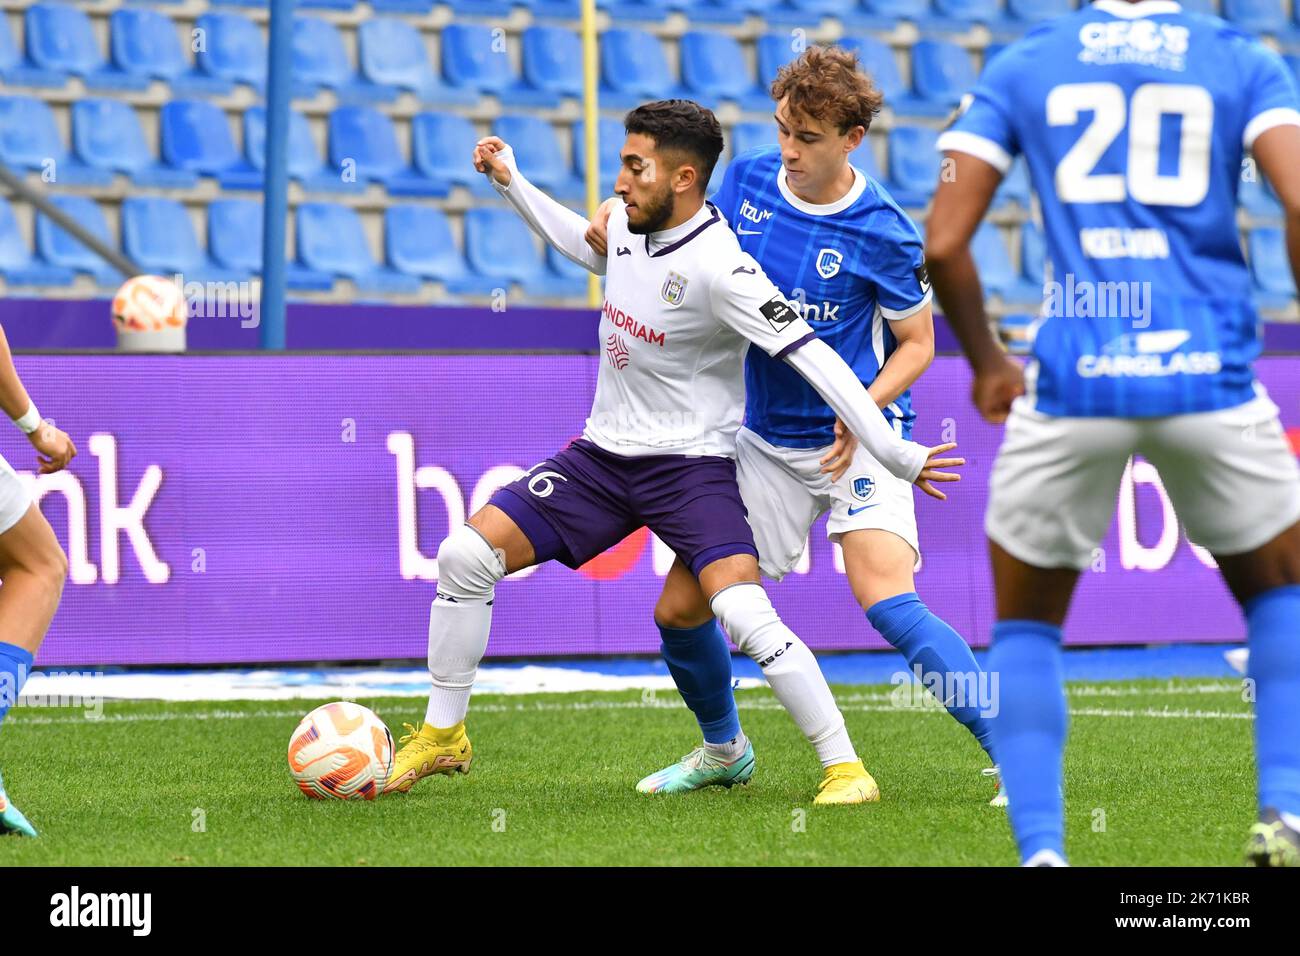 RSCA Futures' Anouar Ait El Hadj and Jong Genk's Kamiel Van de Perre pictured in action during a soccer match between Jong Genk (u23) and RSCA Futures (u23), Sunday 16 October 2022 in Genk, on day 9 of the 2022-2023 'Challenger Pro League' 1B second division of the Belgian championship. BELGA PHOTO JILL DELSAUX Stock Photo